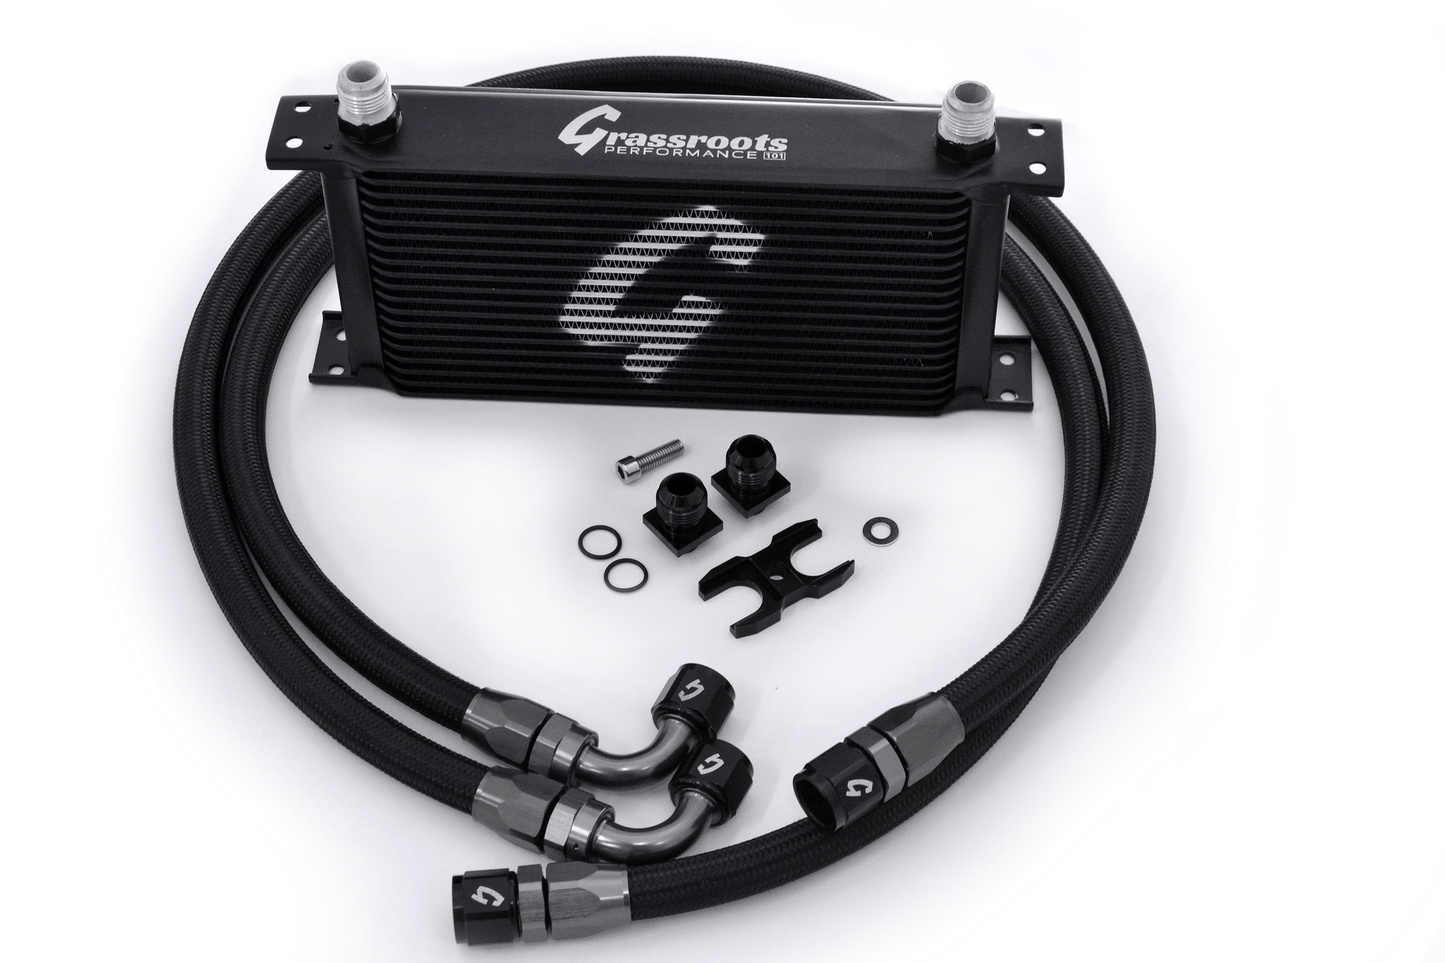 Grassroots Performance - BMW E36 DIRECT-FIT 19-ROW OIL COOLER KIT